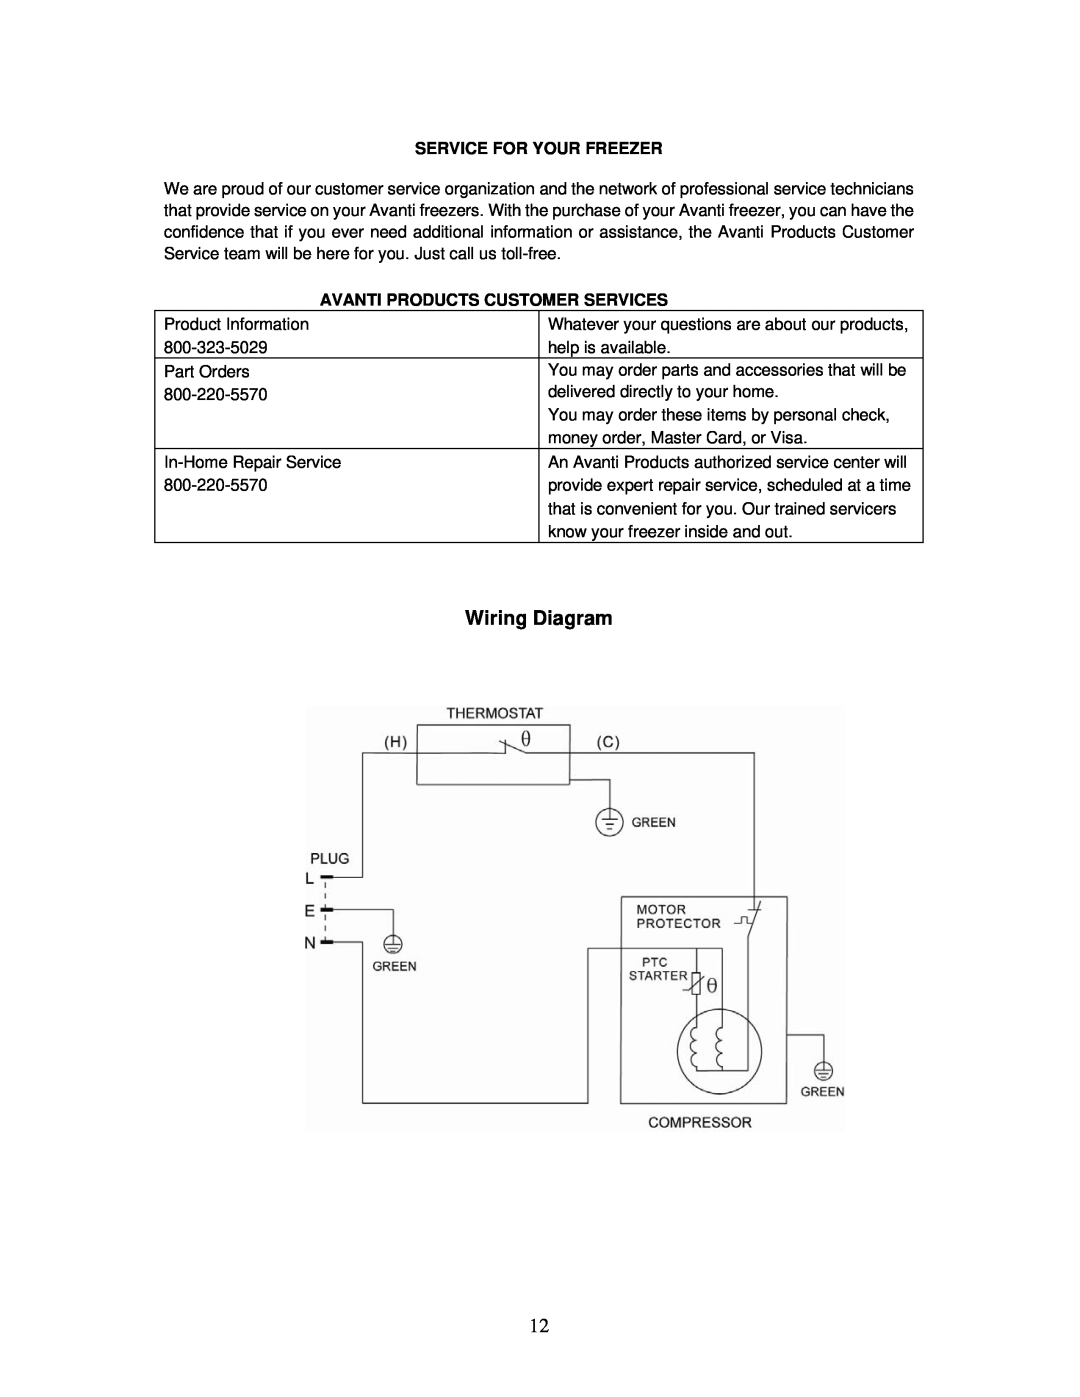 Avanti VM301W instruction manual Wiring Diagram, Service For Your Freezer, Avanti Products Customer Services 